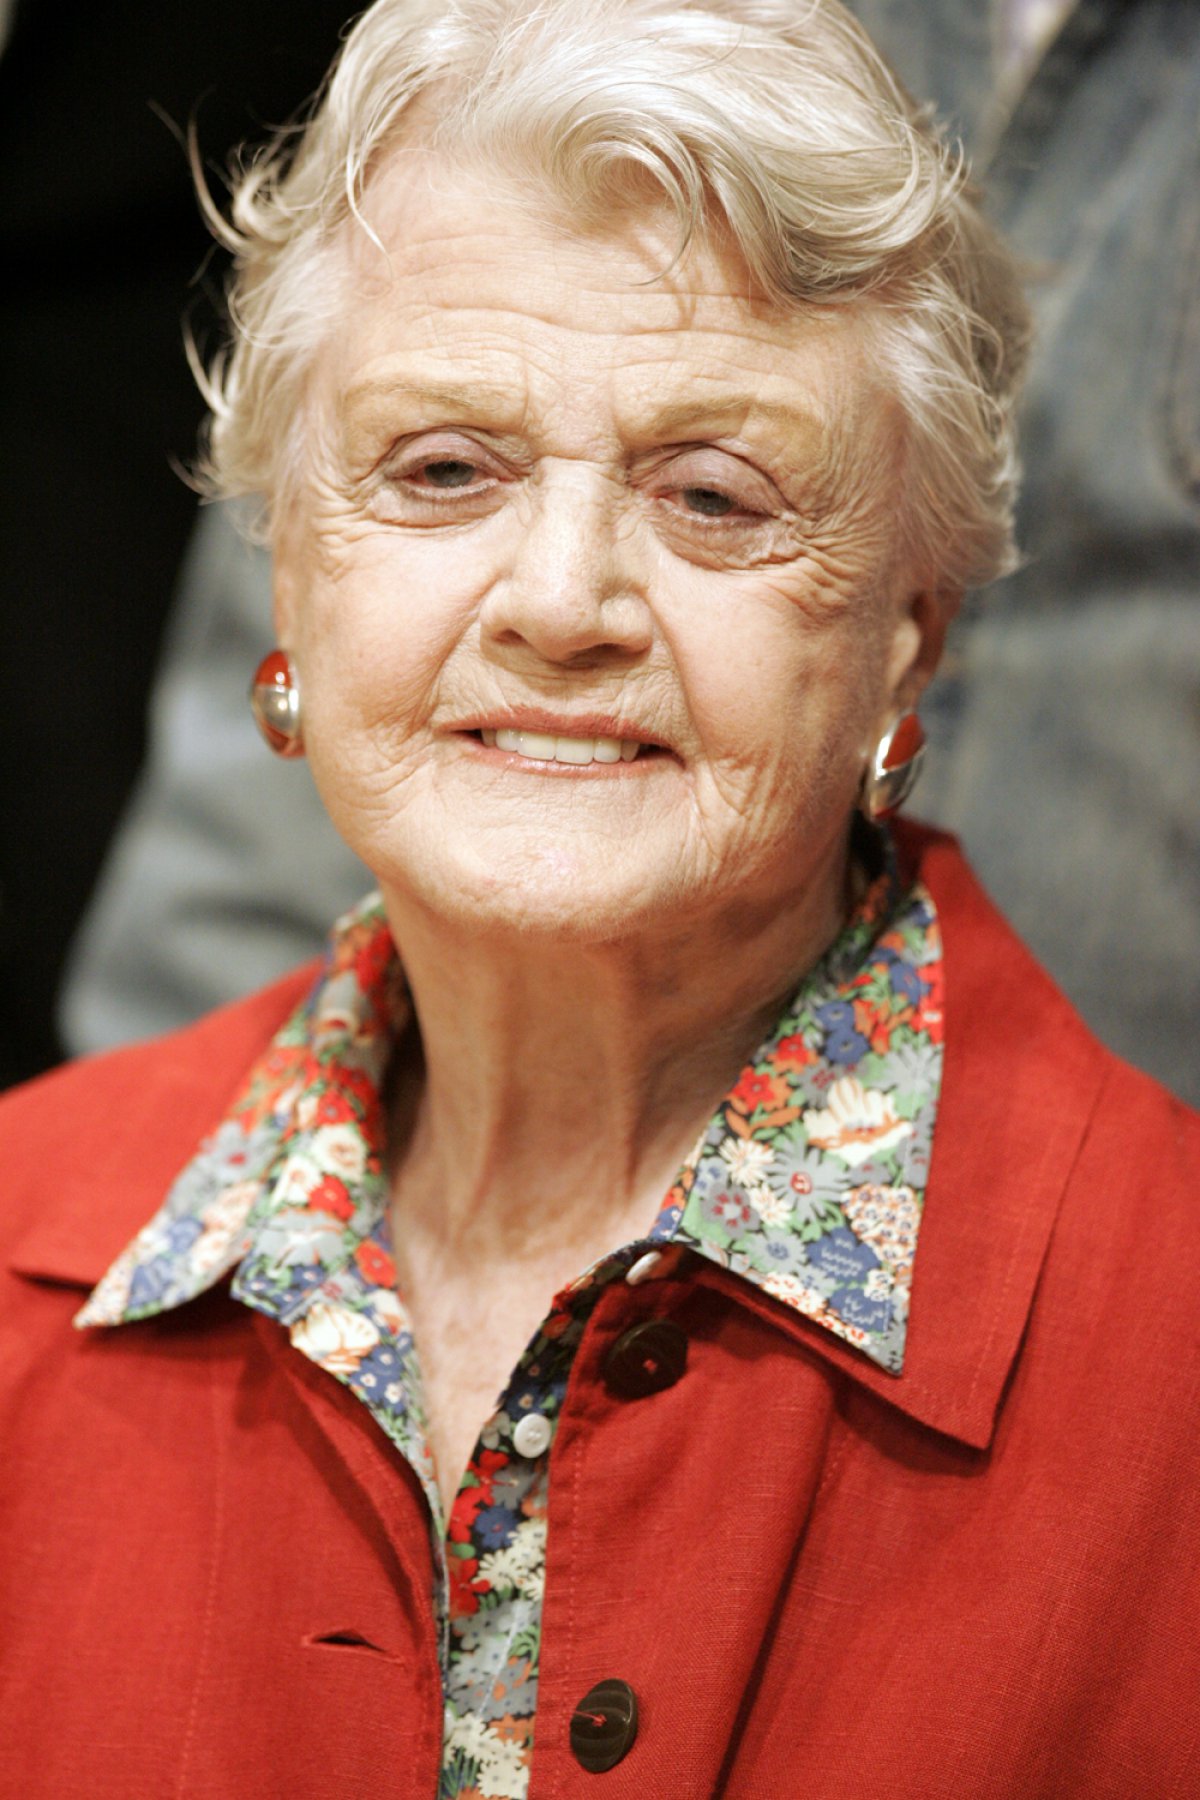 Broadway Legend Murder She Wrote Sleuth Angela Lansbury Dead At 96 Reality Tv World 